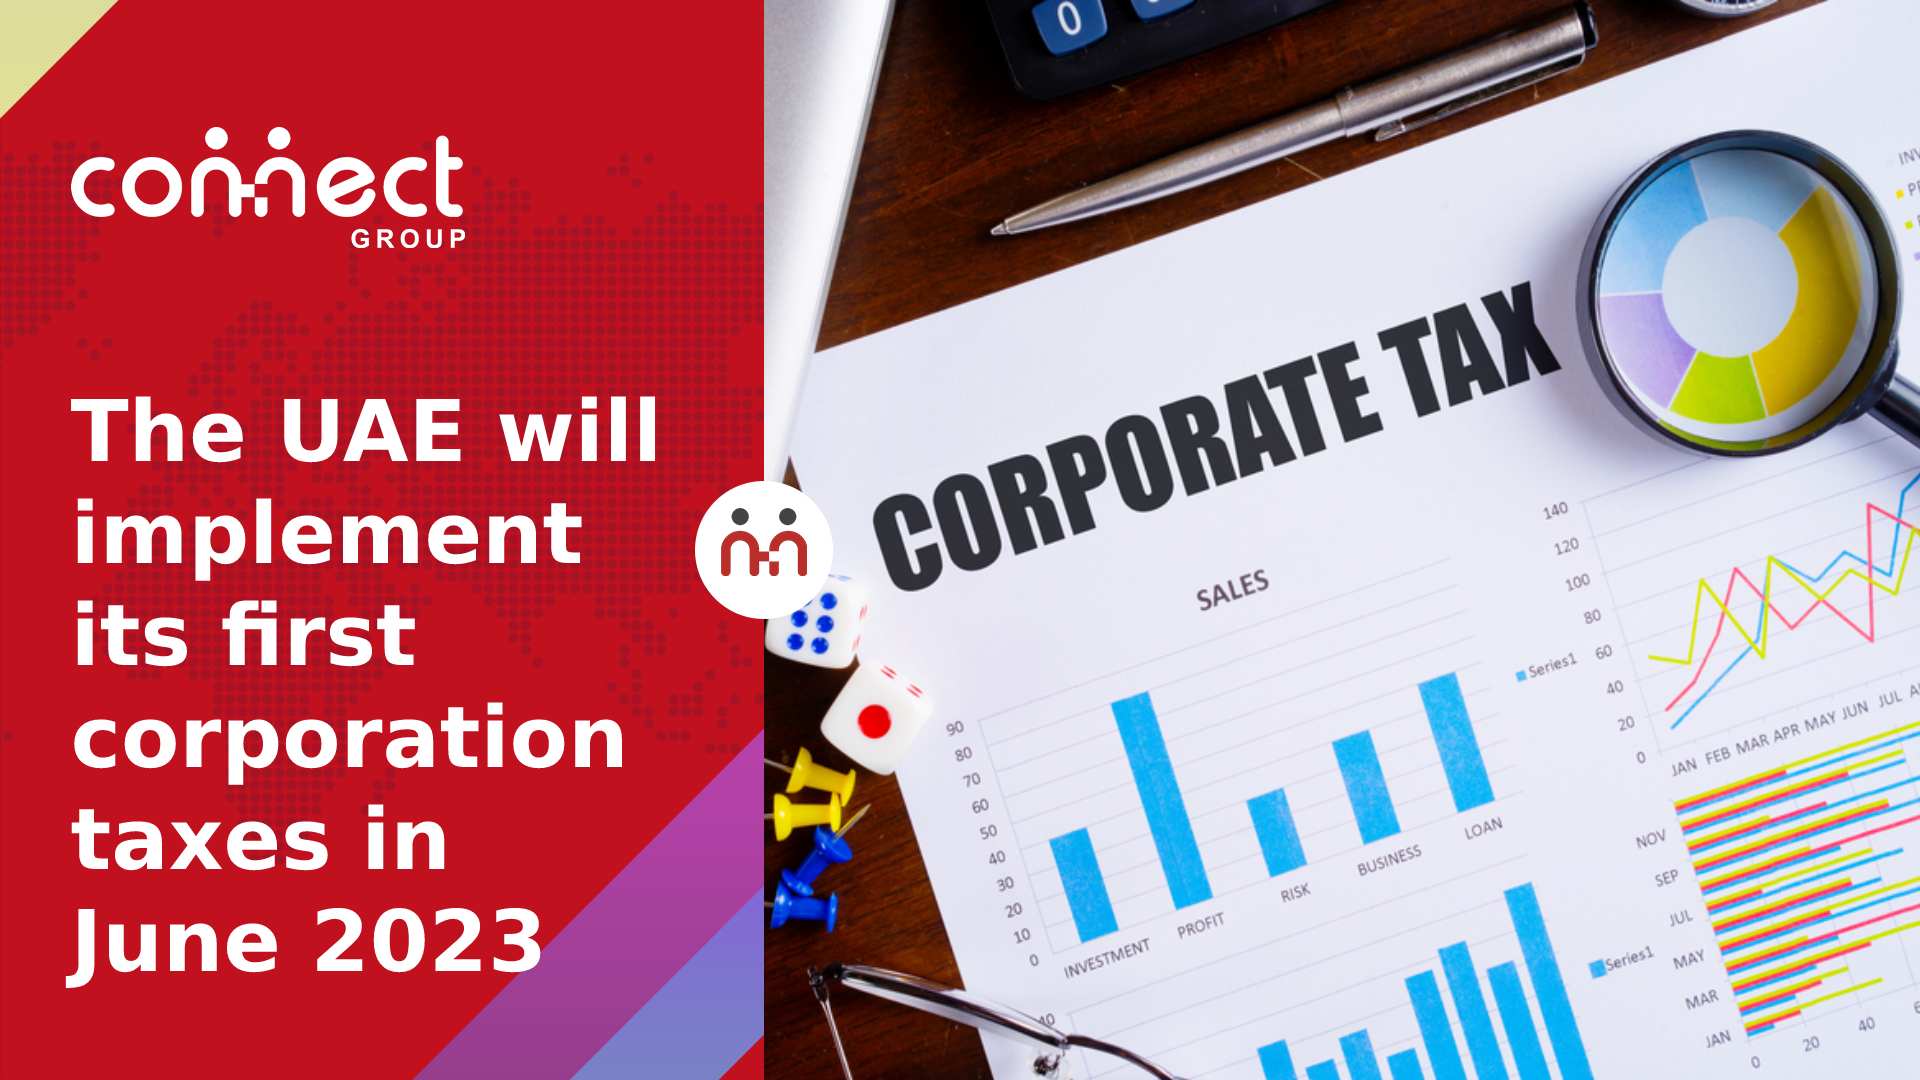 The UAE will implement its first corporation taxes in June 2023